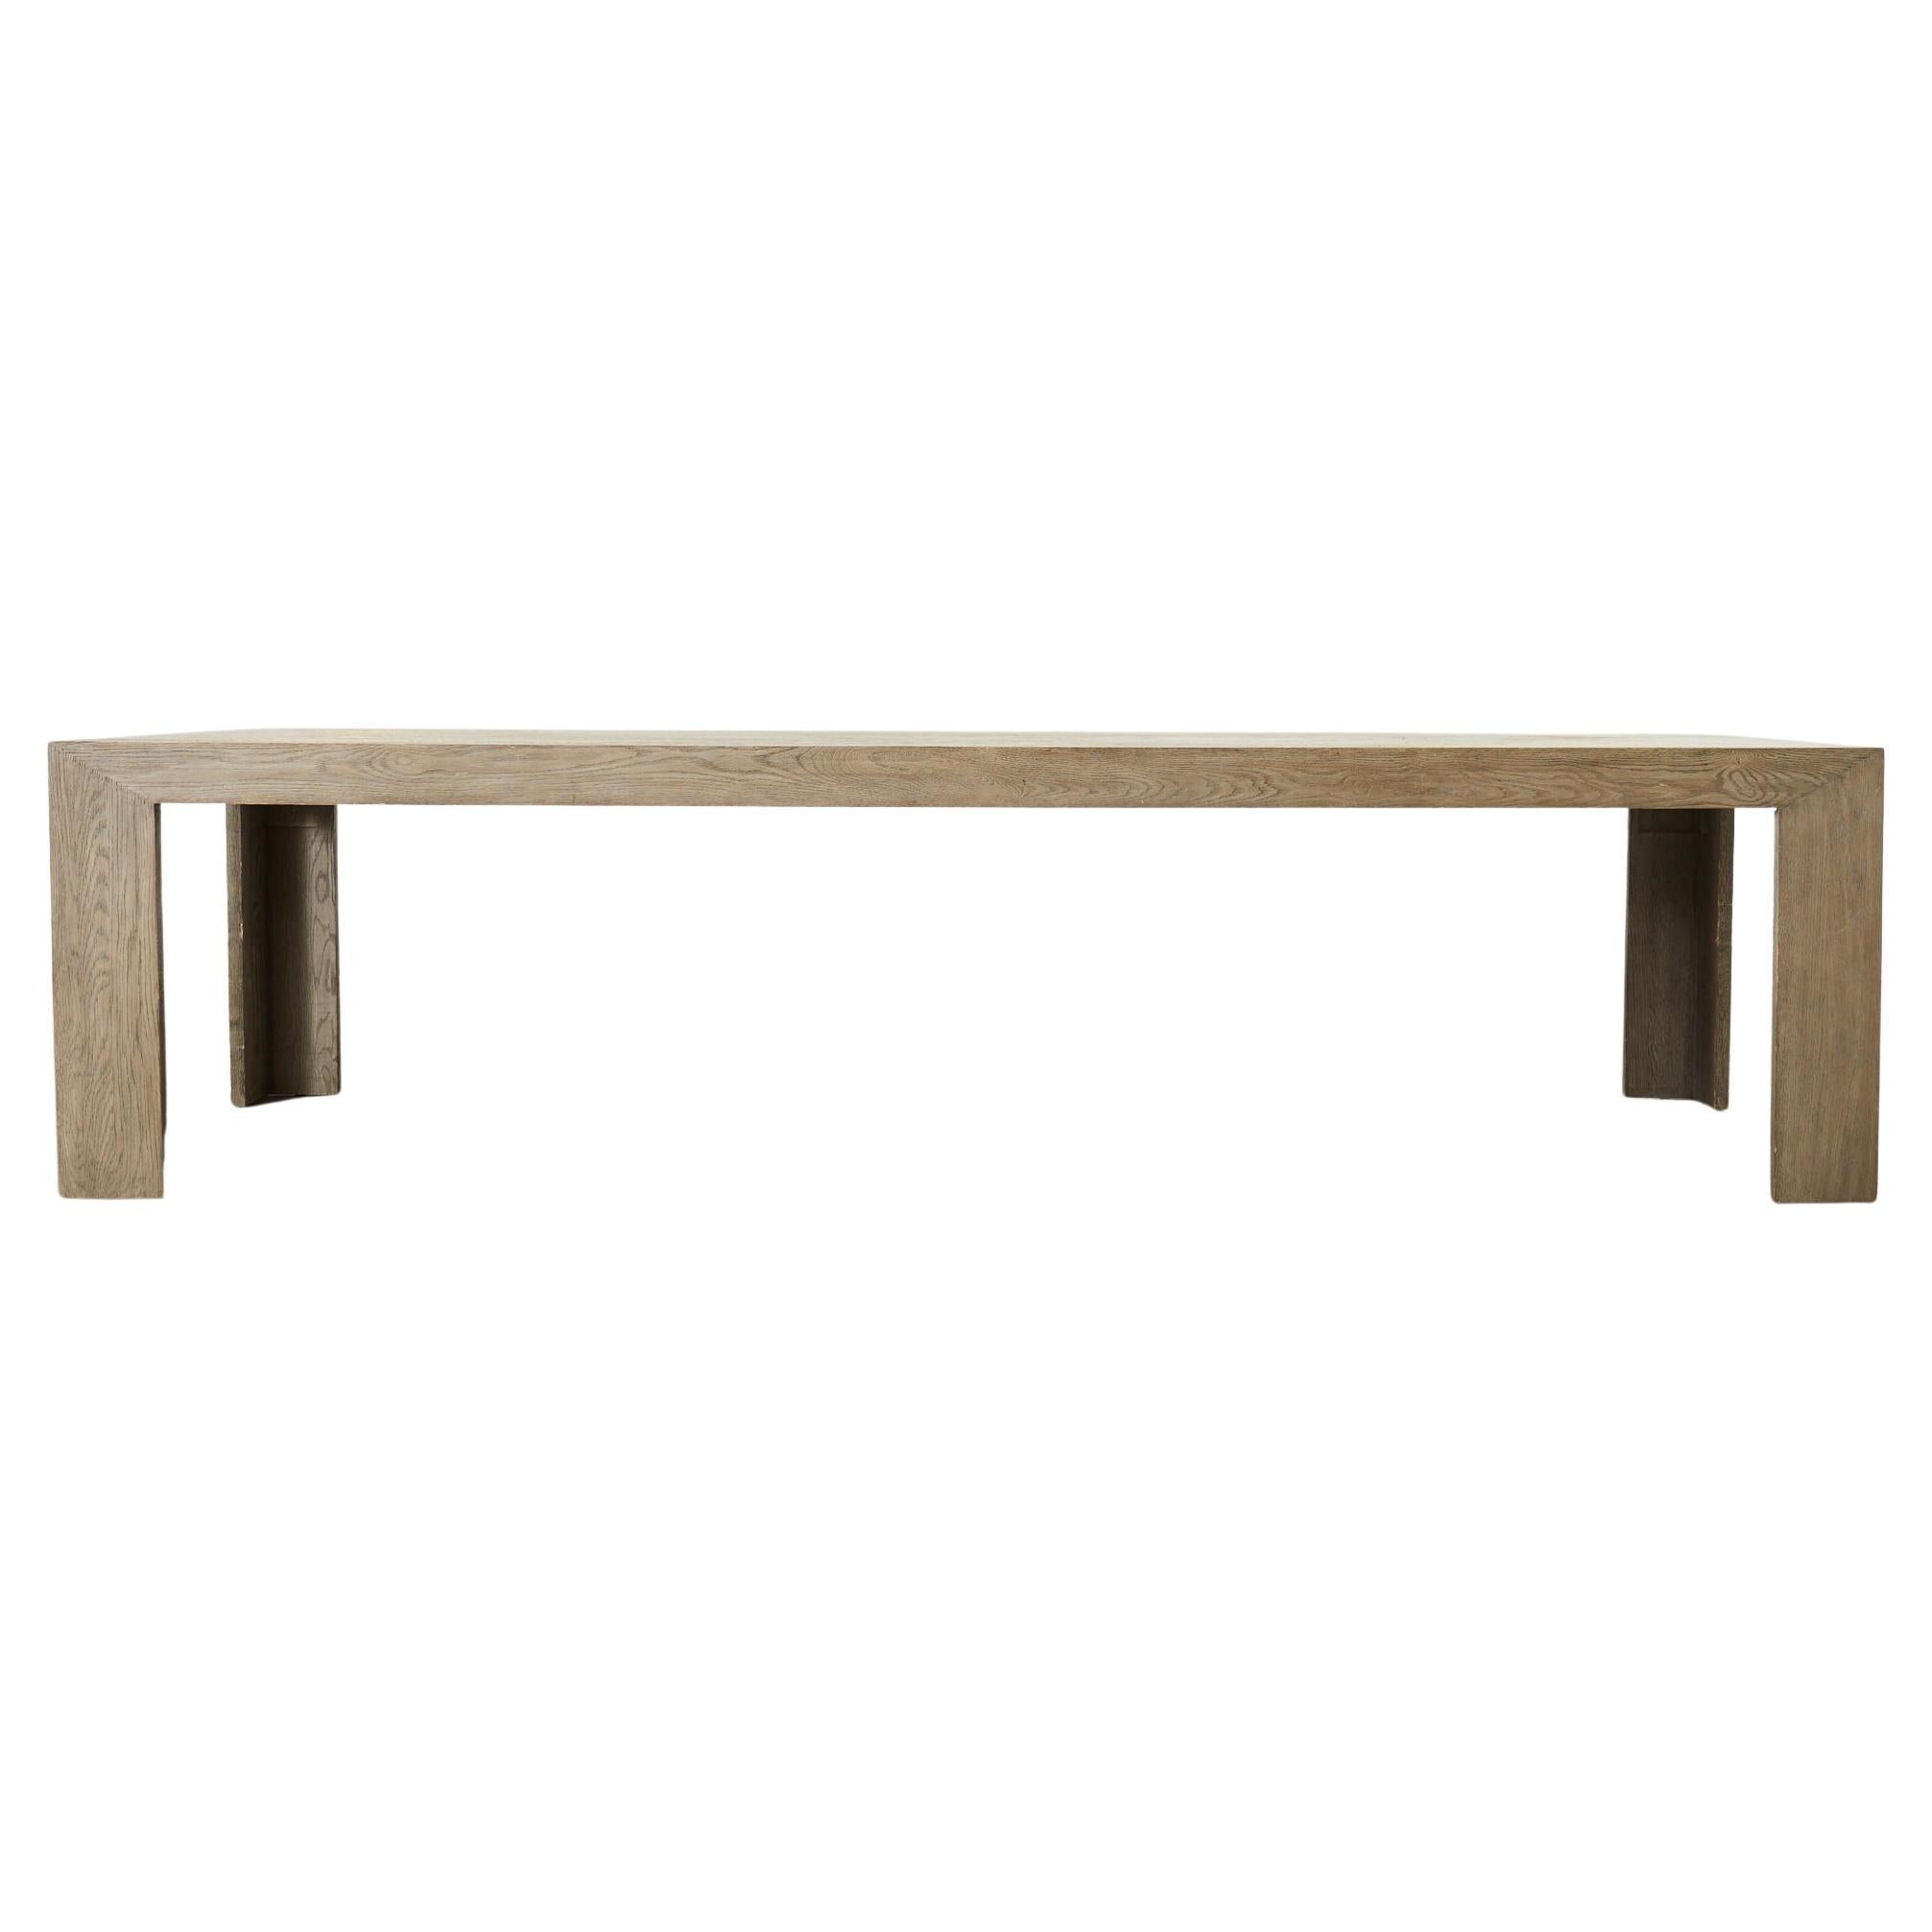 How thick should a dining table be?